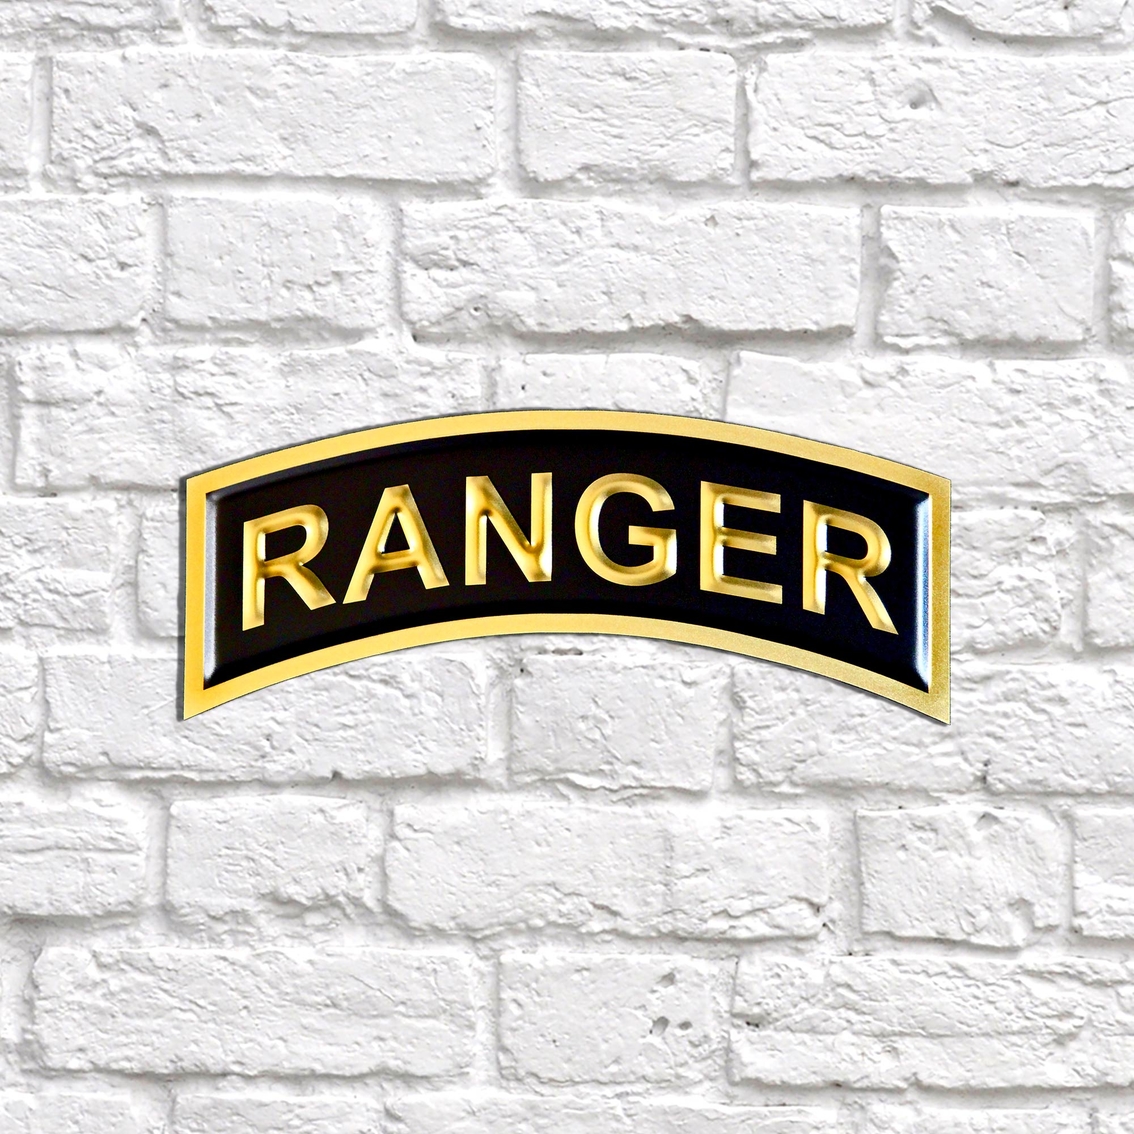 Chrome Domz Rangers Tab Embossed Wall Art - Image 2 of 3